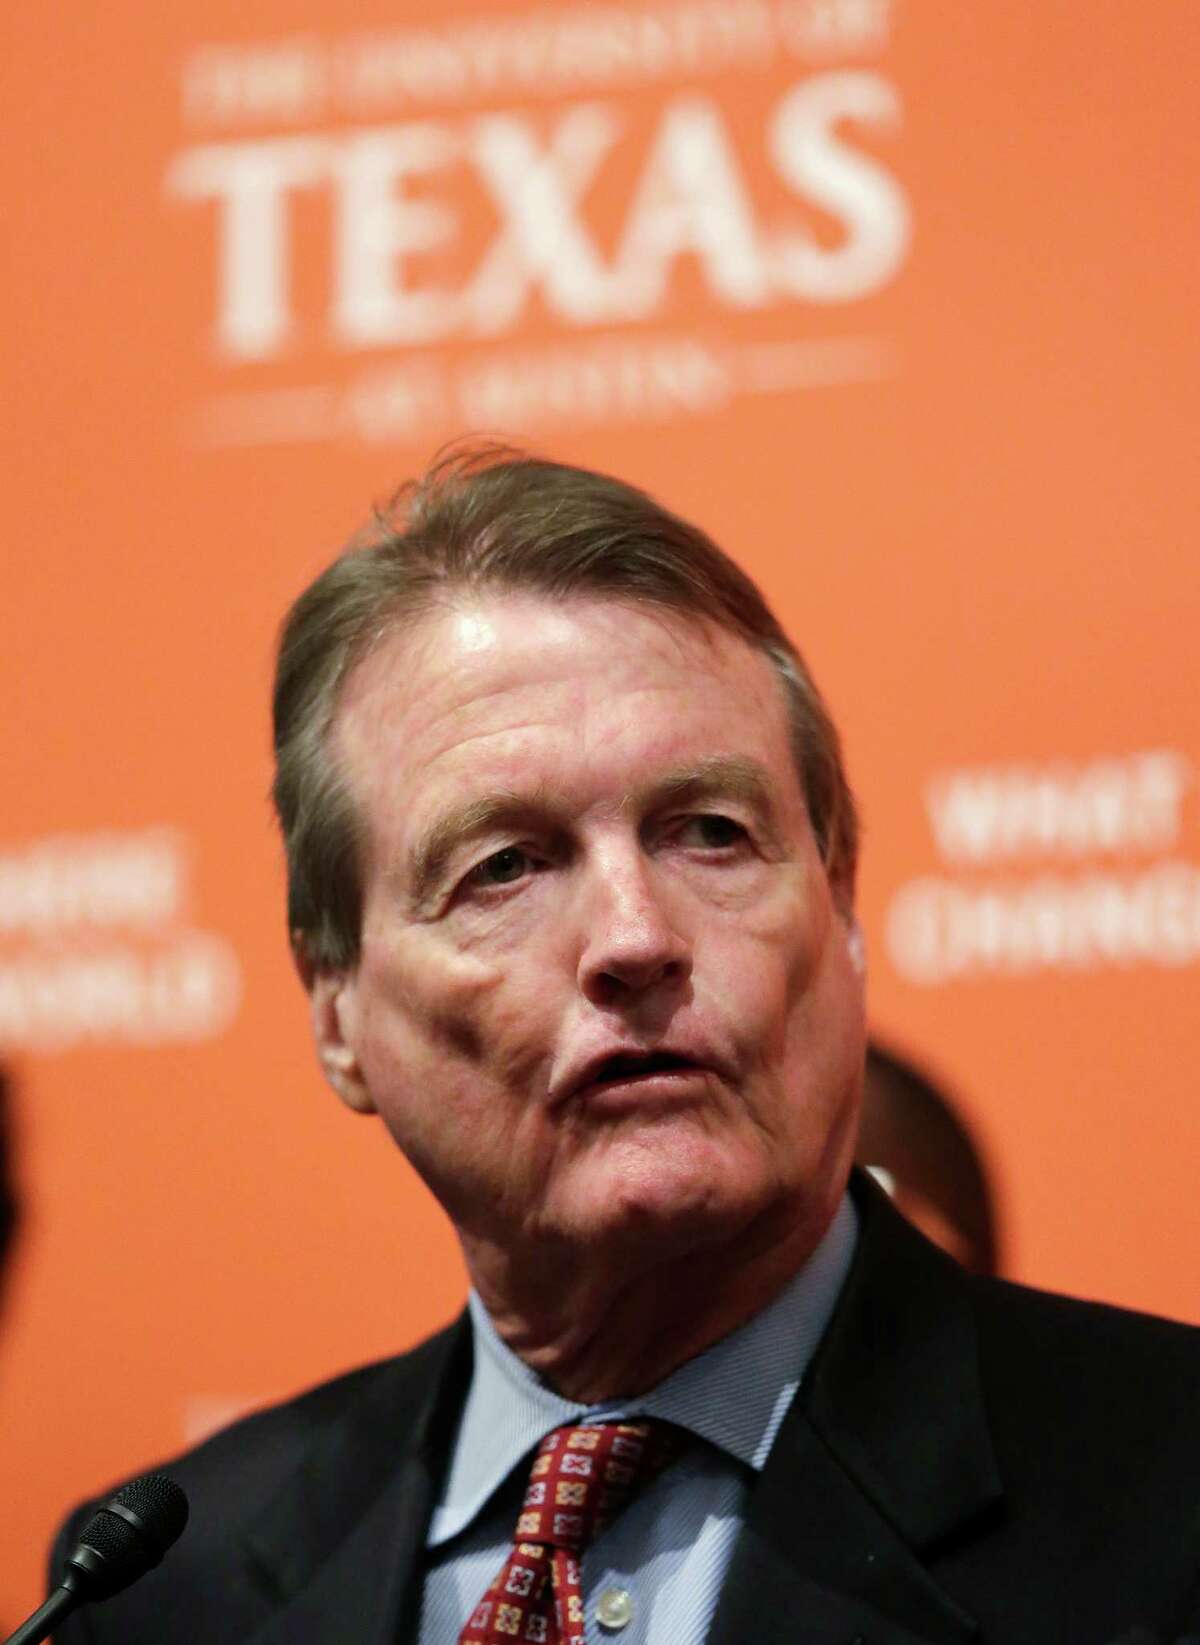 University of Texas President Bill Powers said Monday that the school will not alter its admissions policy as a result of the court's decision.